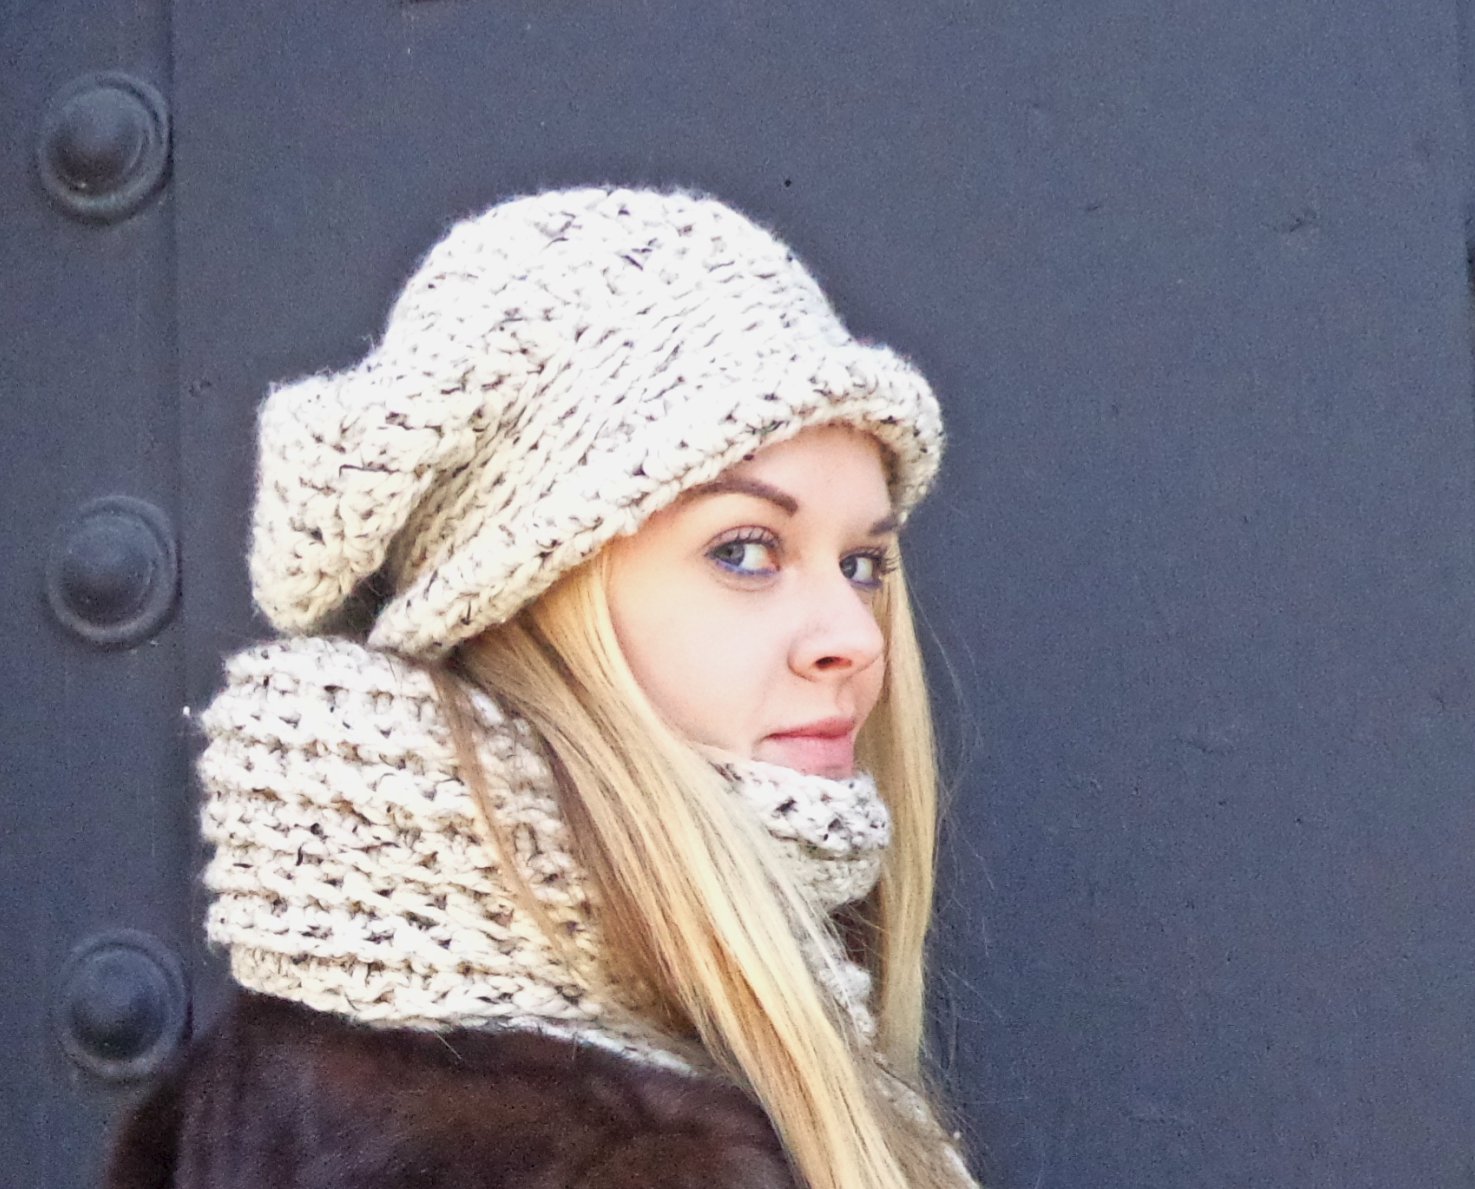 Chance-Maxi-Chunky-Slouch-with-Band-and-Fold-up-Brim-and-Naylor-Maxi-Chunky-Scarf-with-Fringe-Oatmeal-Angled-View.jpg